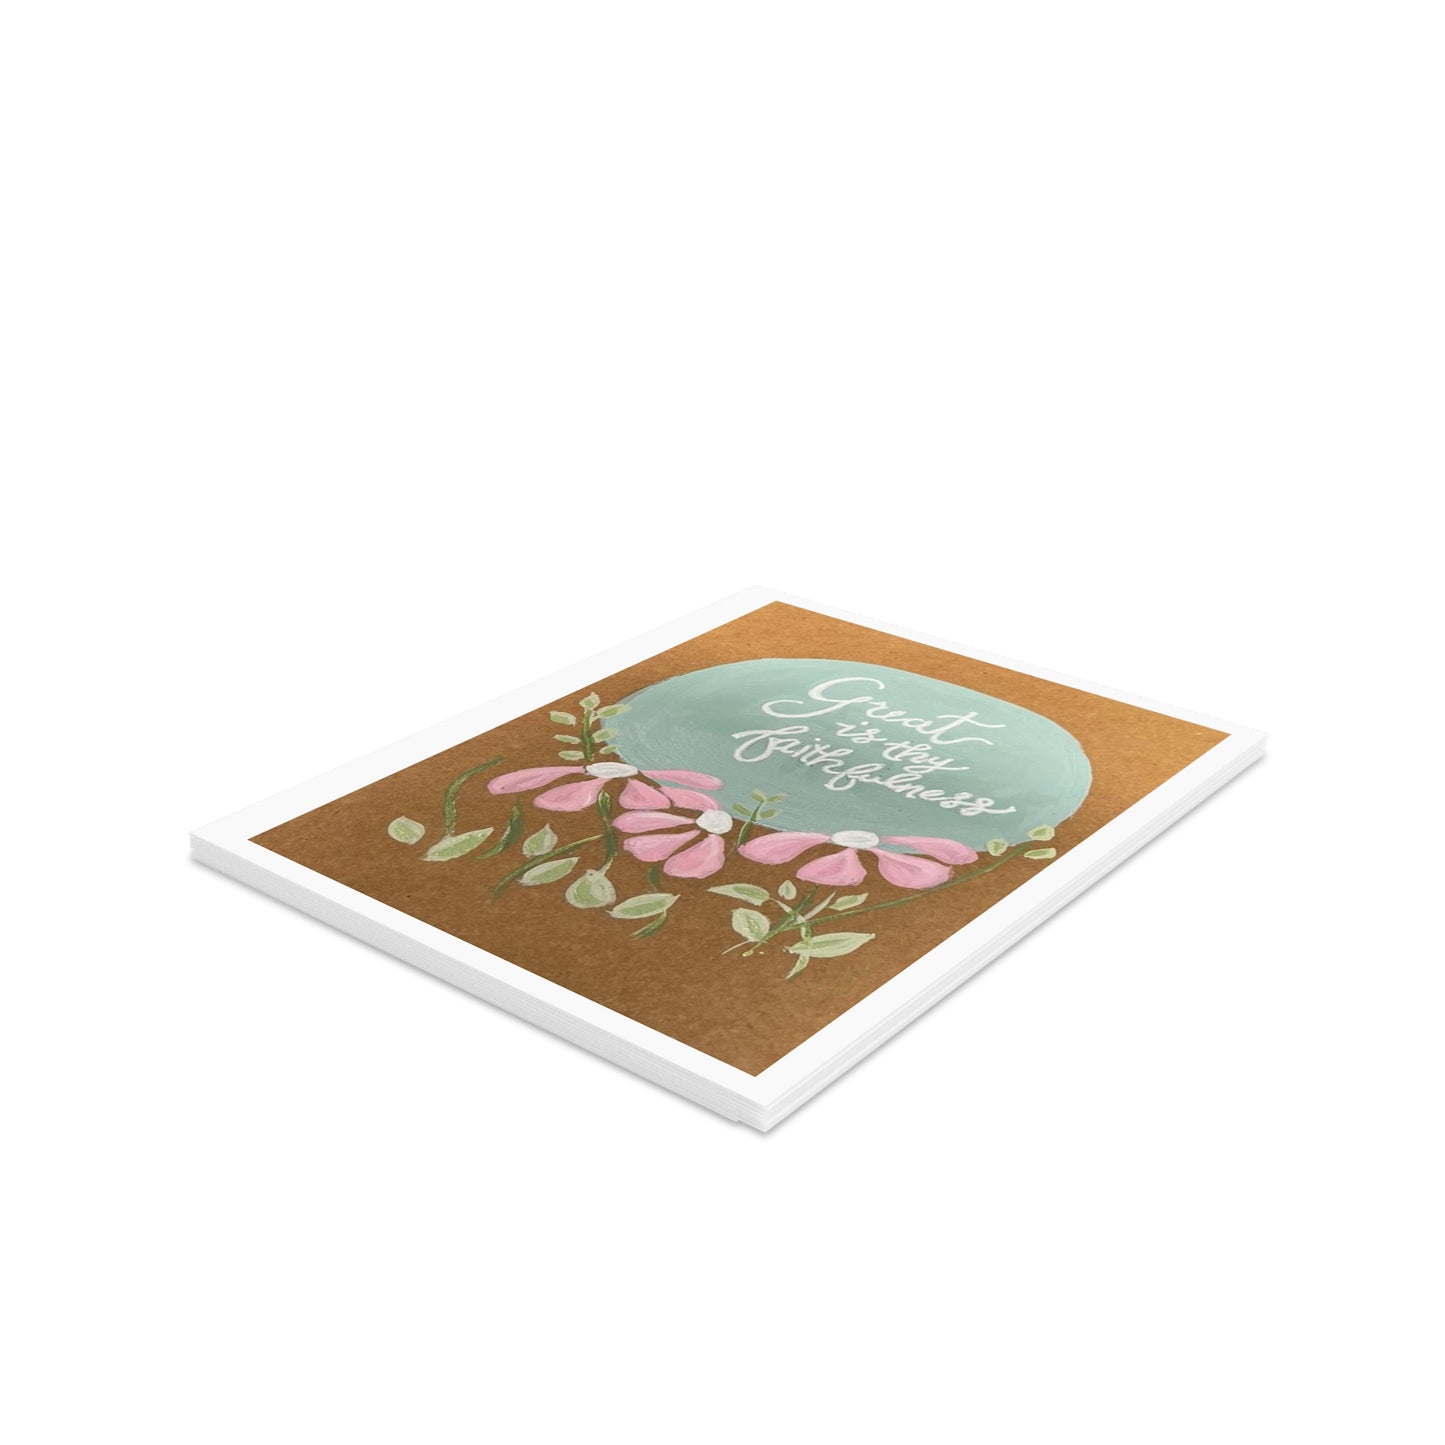 Great is Thy Faithfulness - White - Greeting cards (8, 16, and 24 pcs)